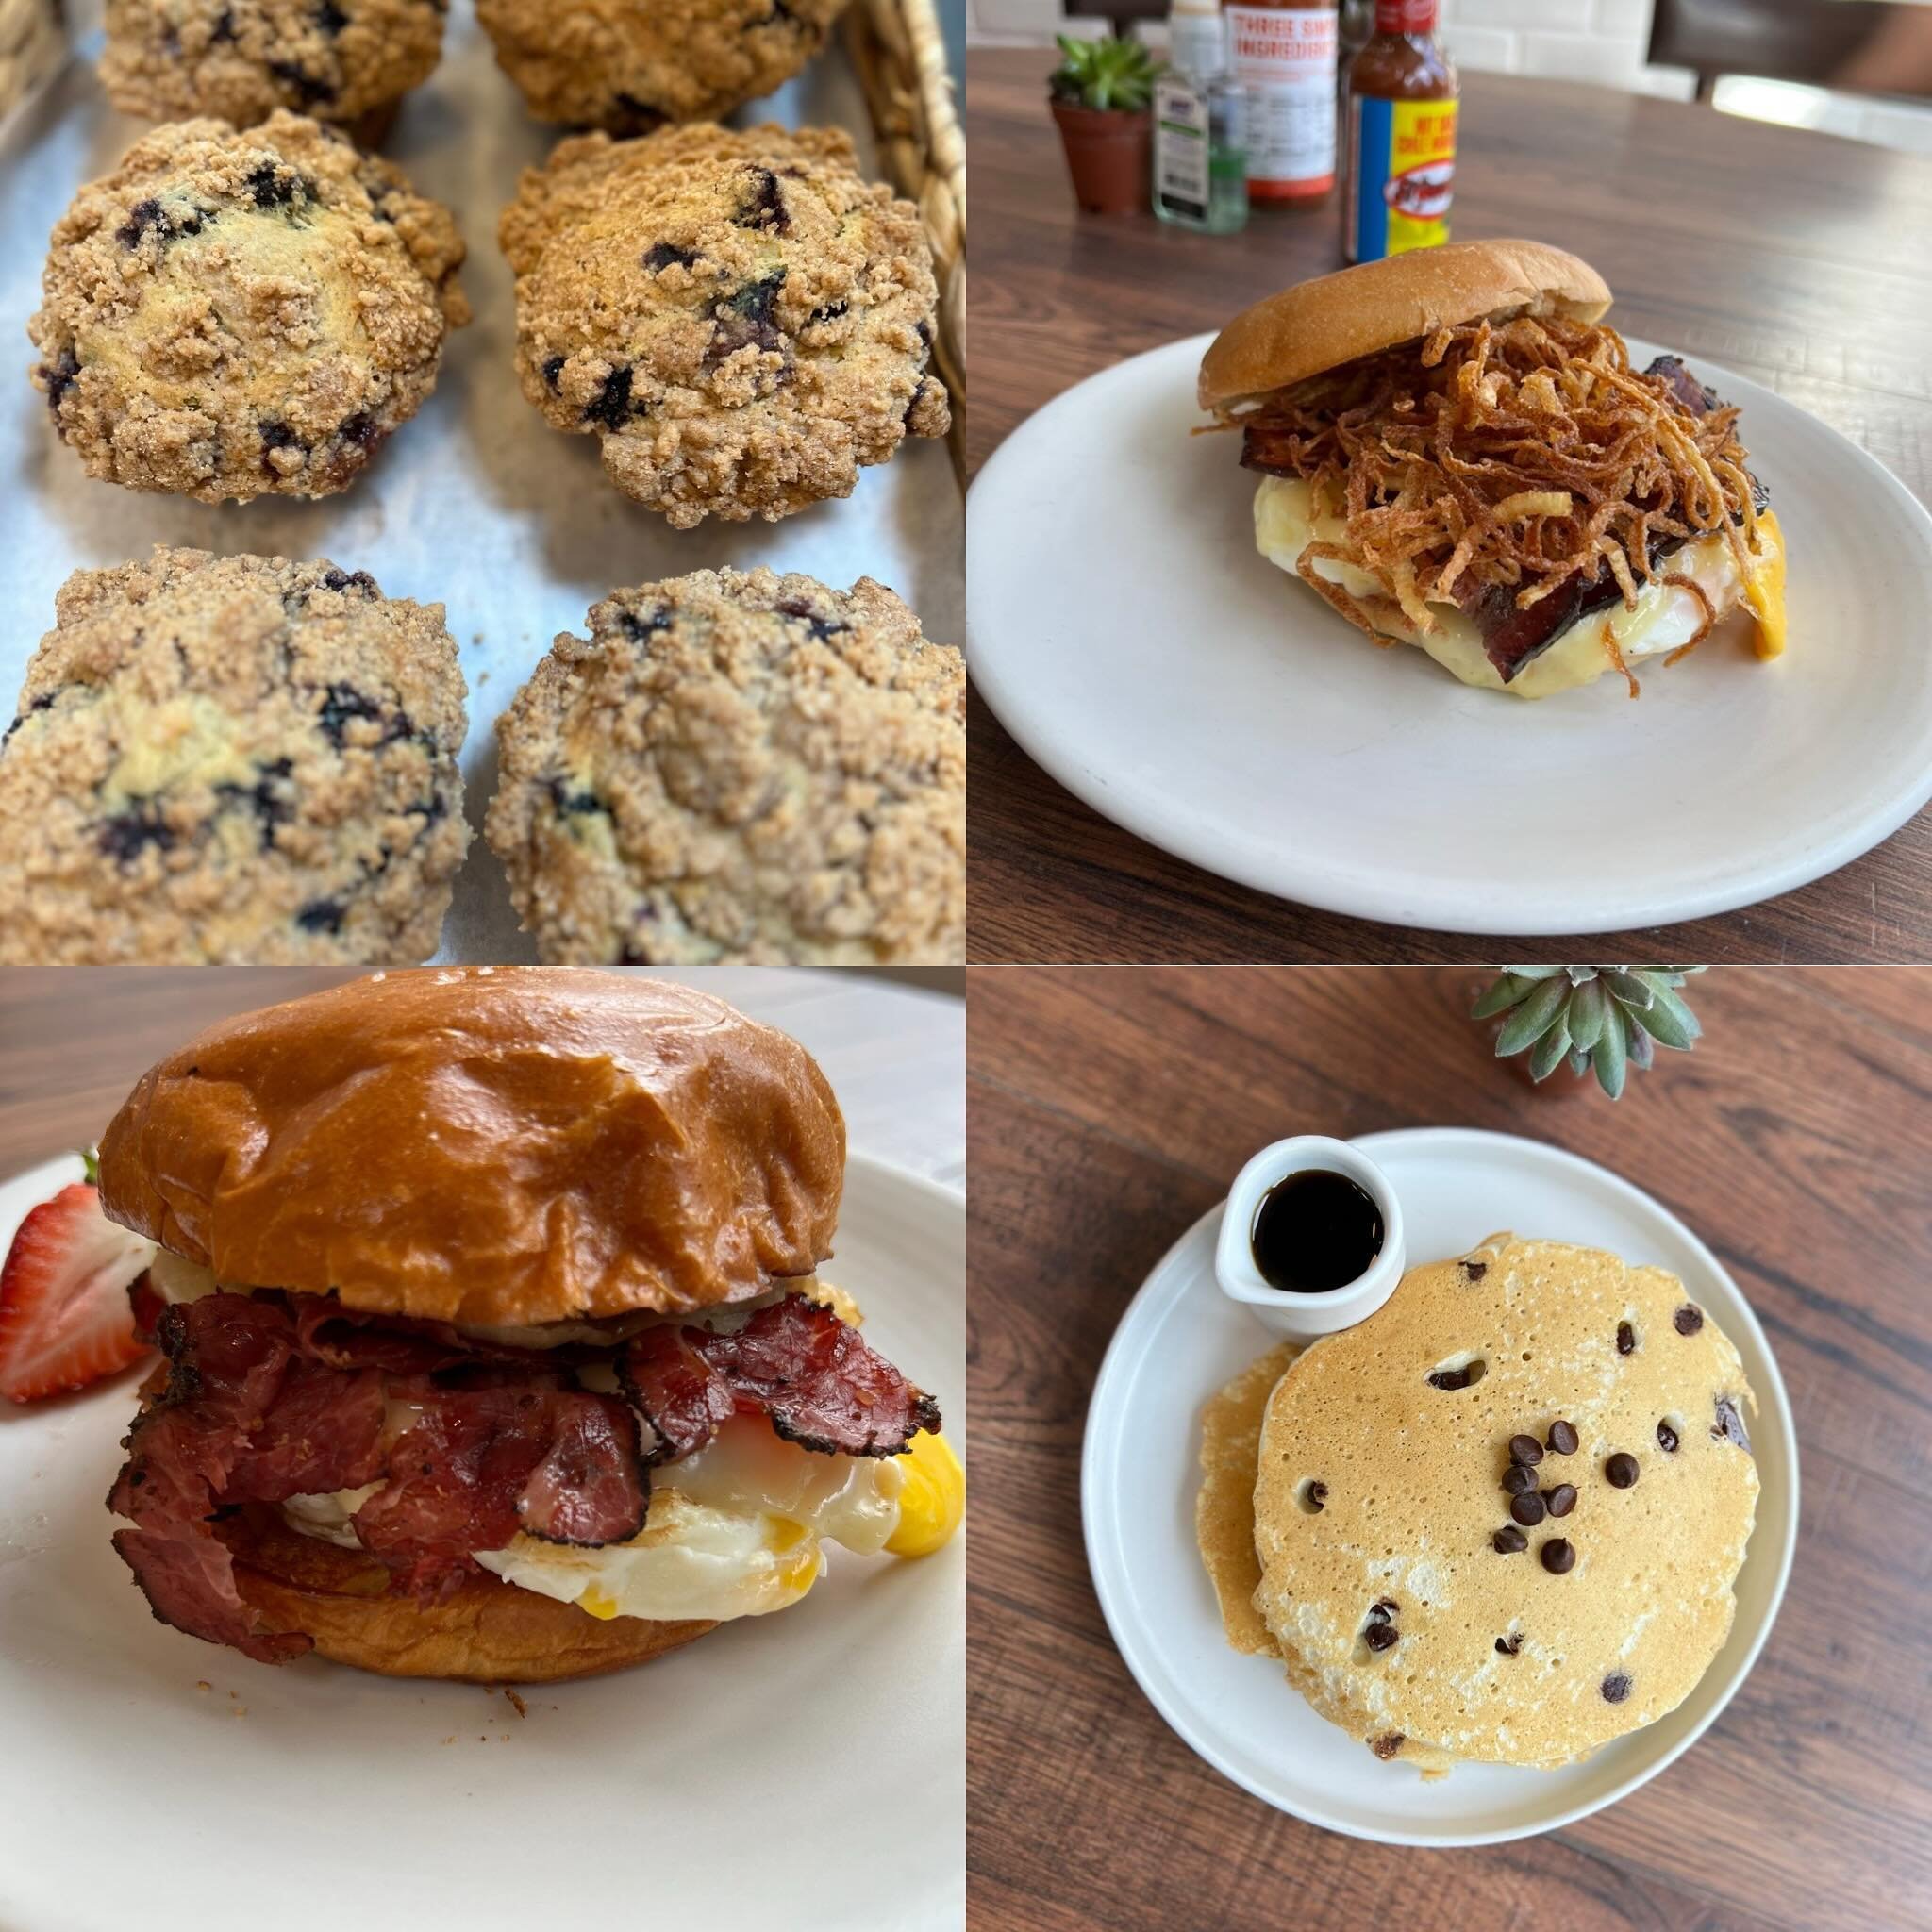 You can now have breakfast all day EVERYDAY! We are now open Monday-Friday 7 am-8 pm and Saturday-Sunday 8 am-8pm #alldaycafe #momandpopshop #lowereastside #goodfooddoneright